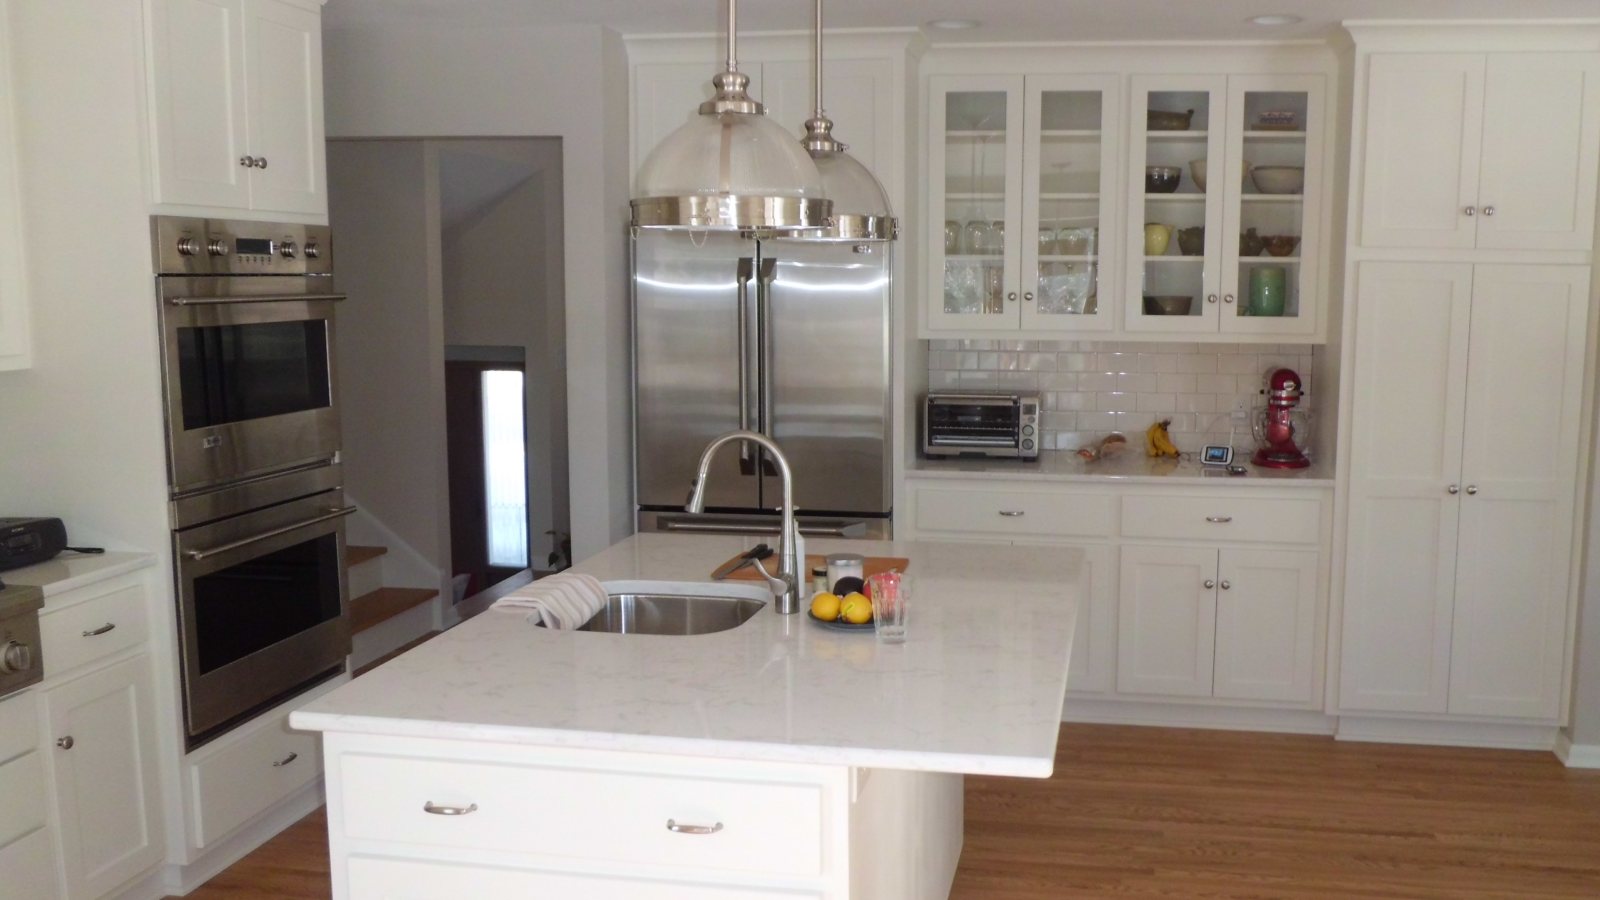 Kitchen Remodel – Before & After Photos!